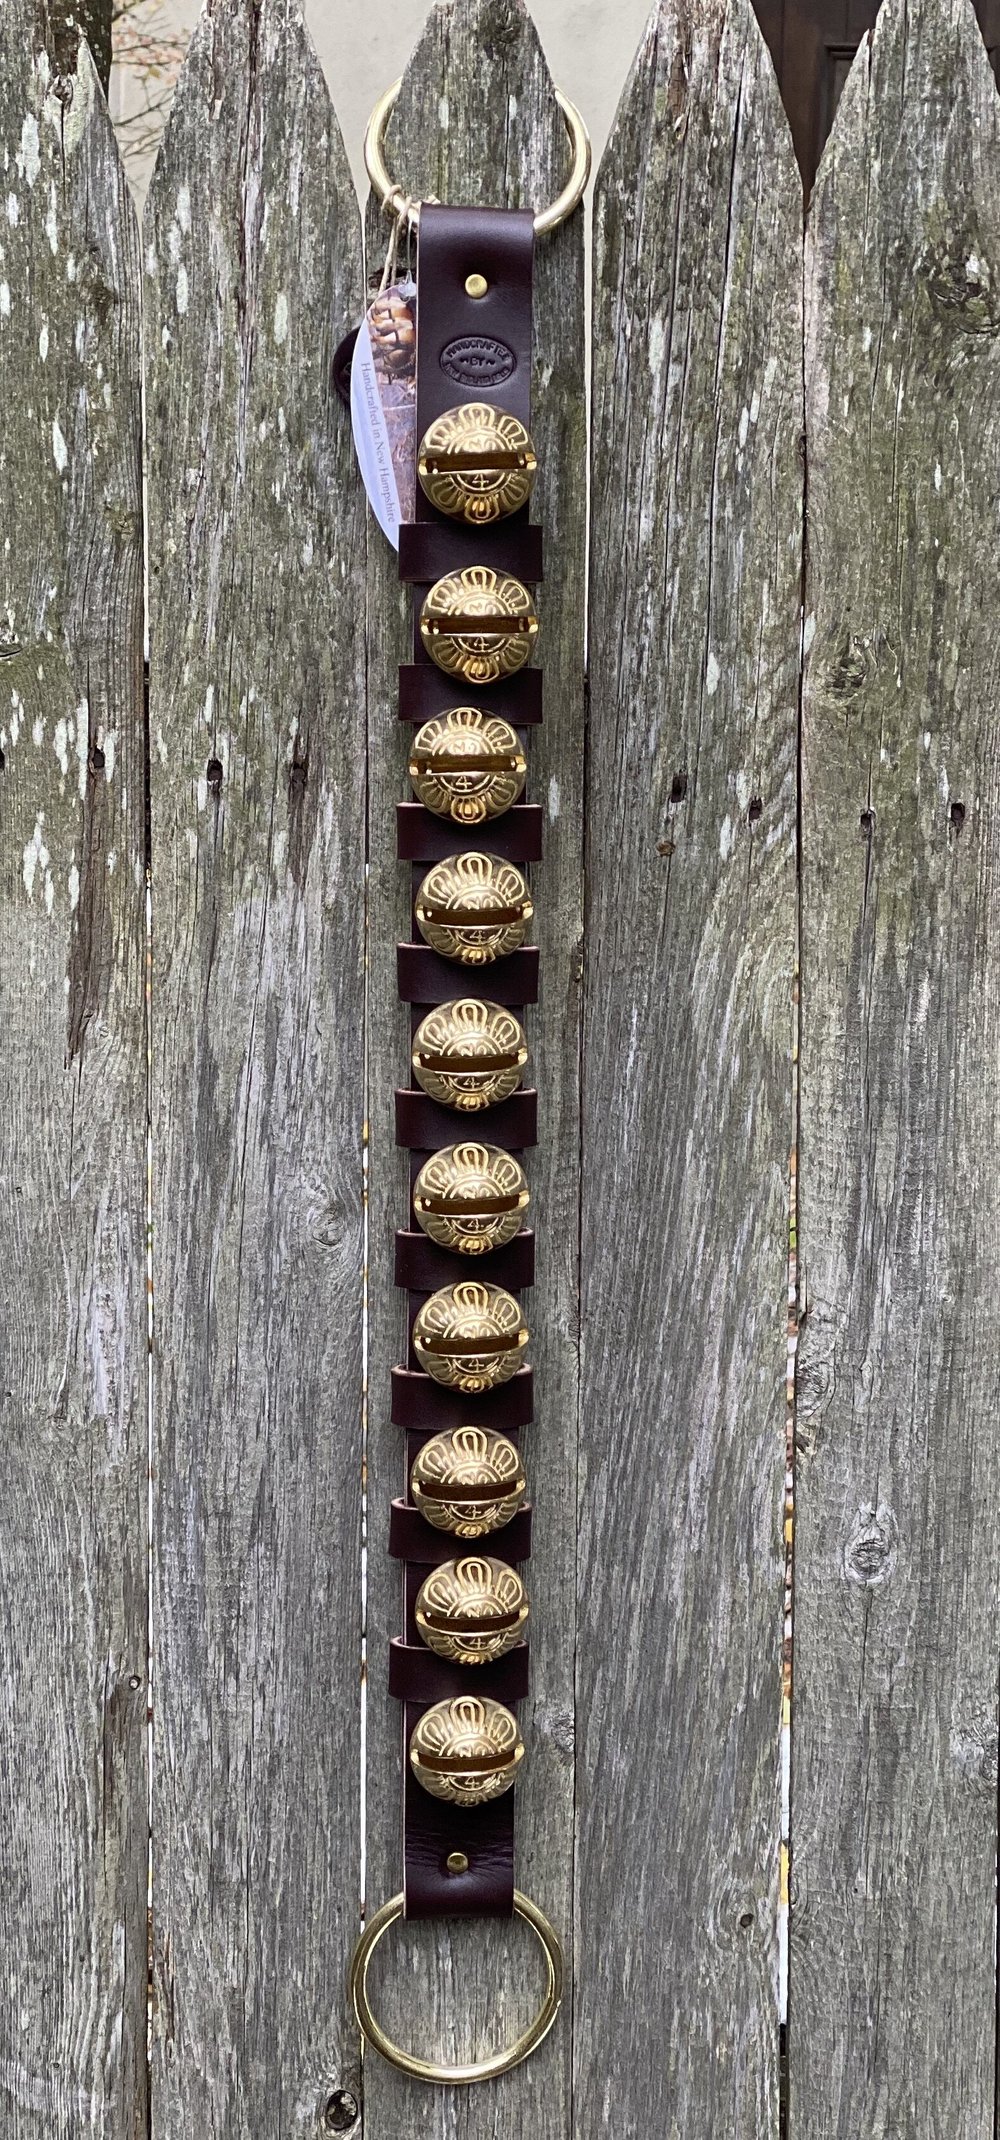 Authentic, solid brass, sleigh bells from Santa's Sleigh Bells